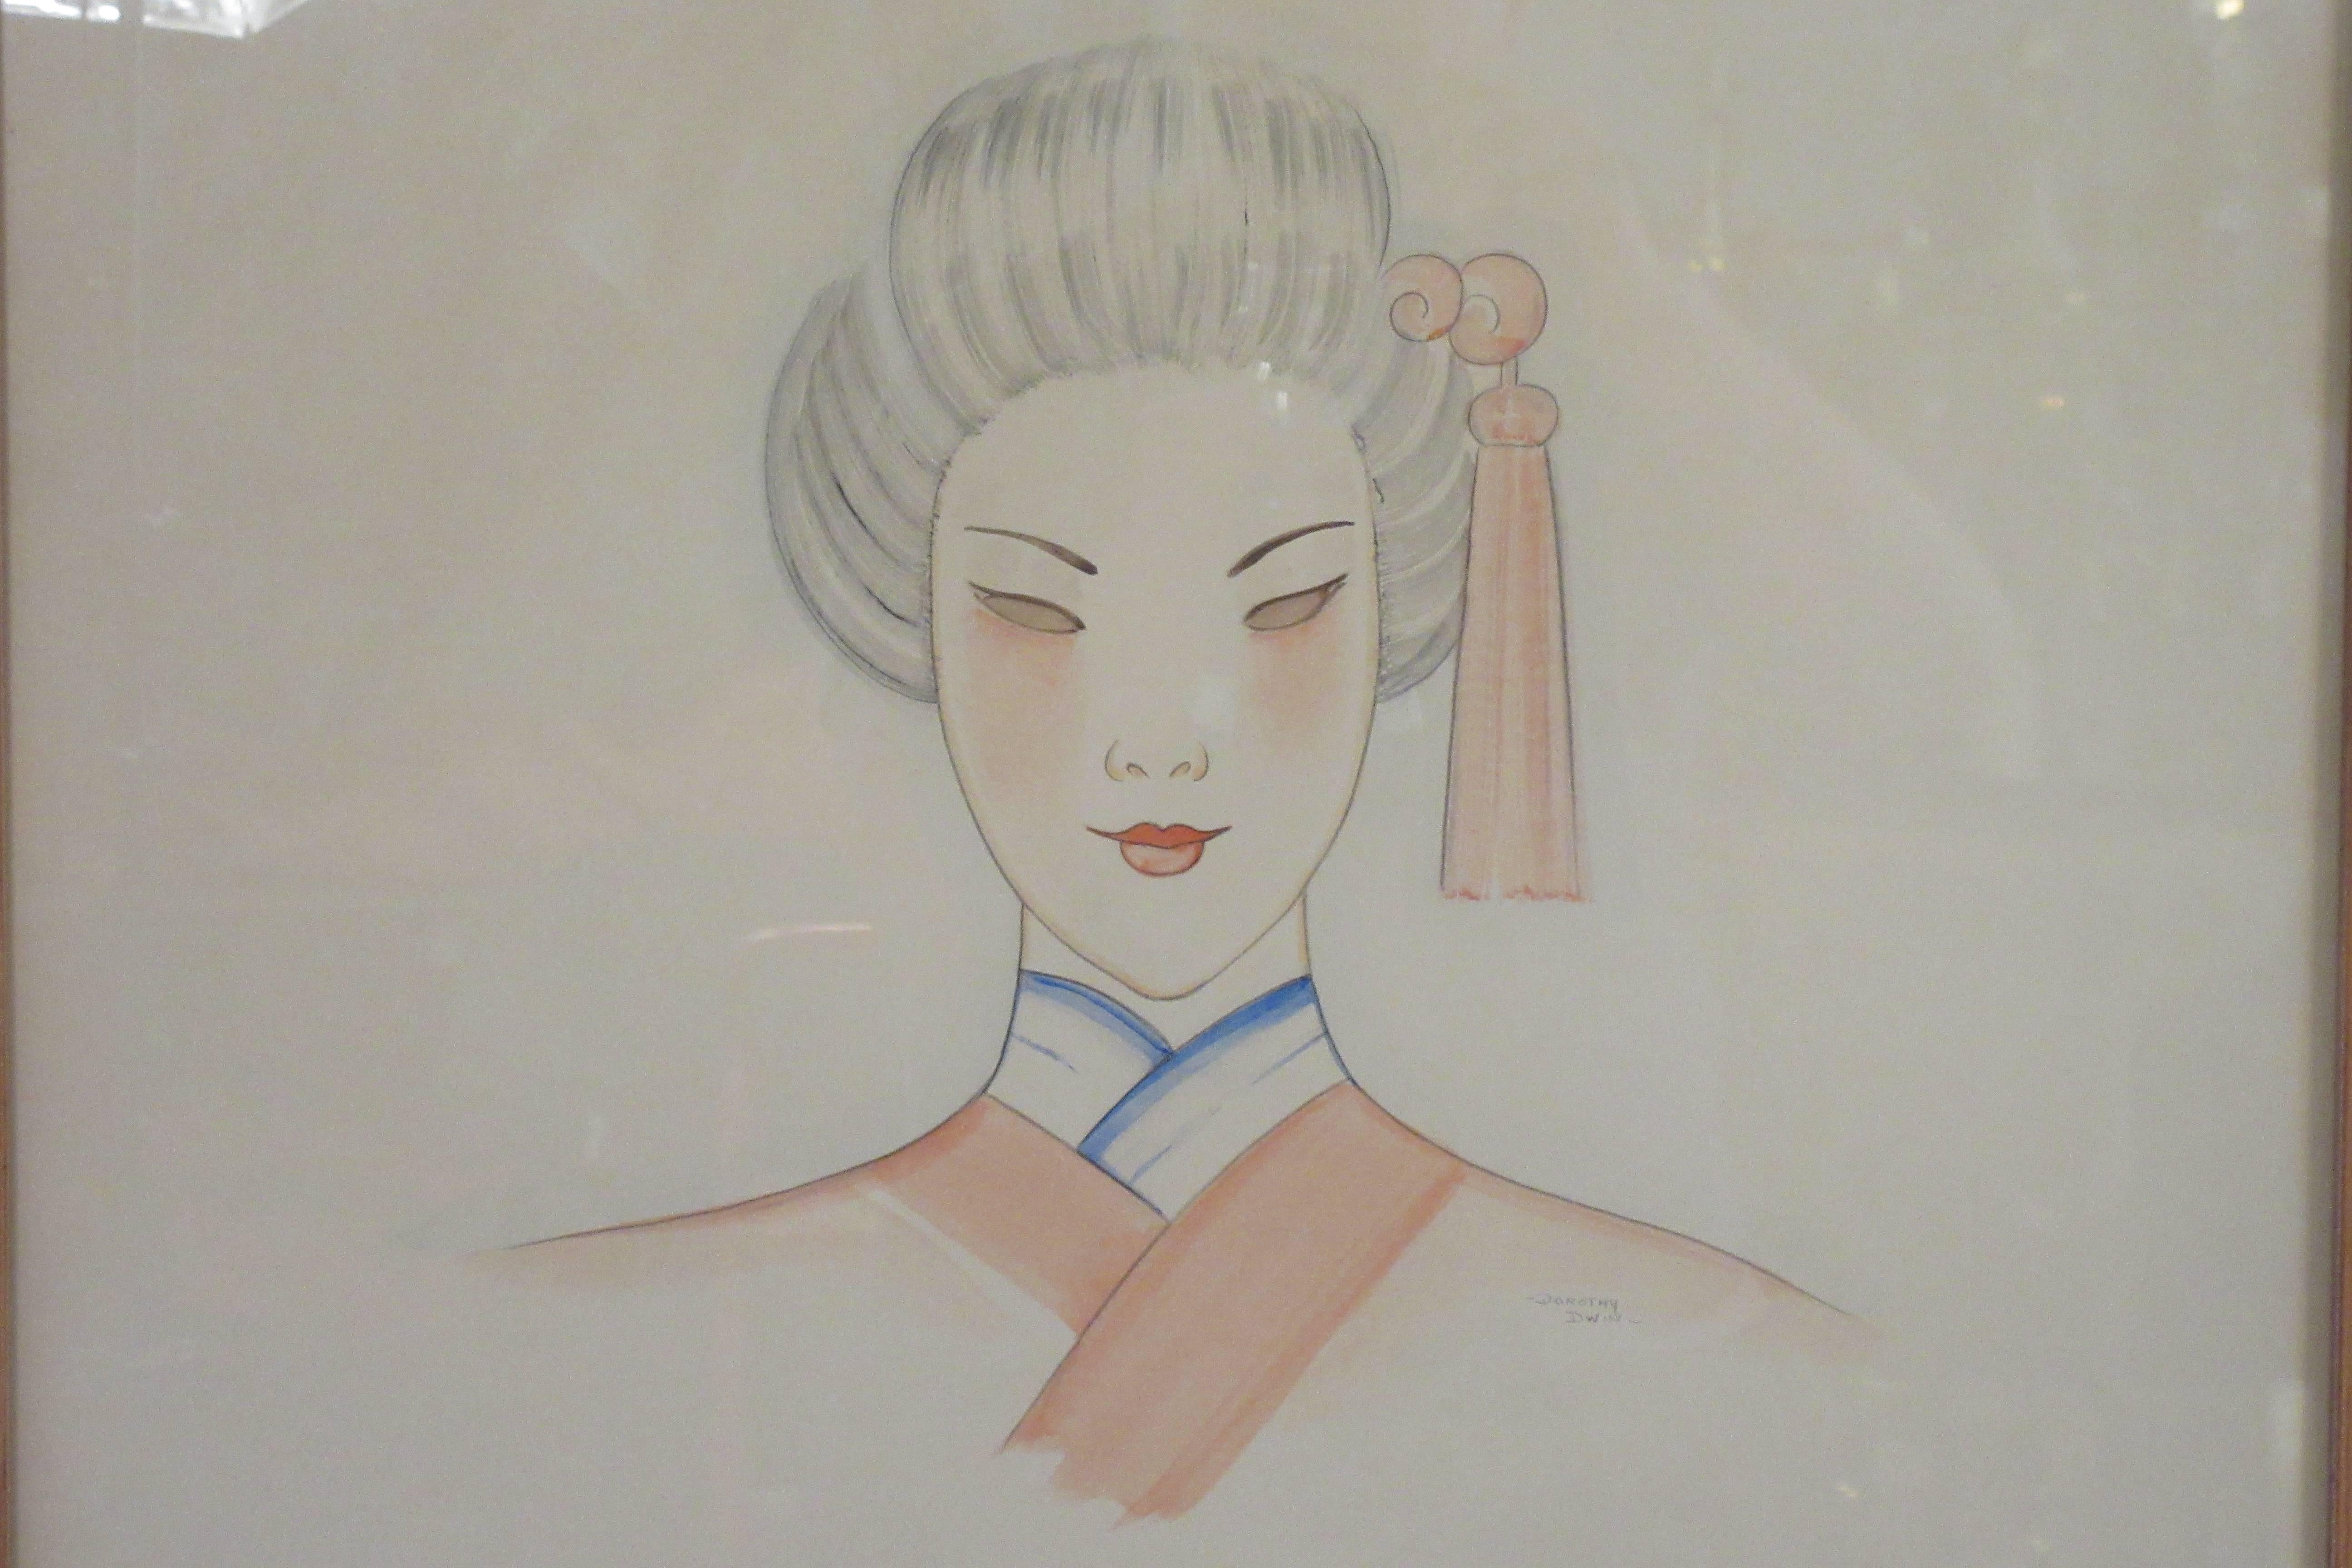 1940s Pastel Painting On Paper Of Asian Woman Signed Dorothy Dwin
Illustration
Wood Frame and glass
Colors: pink, blue, white